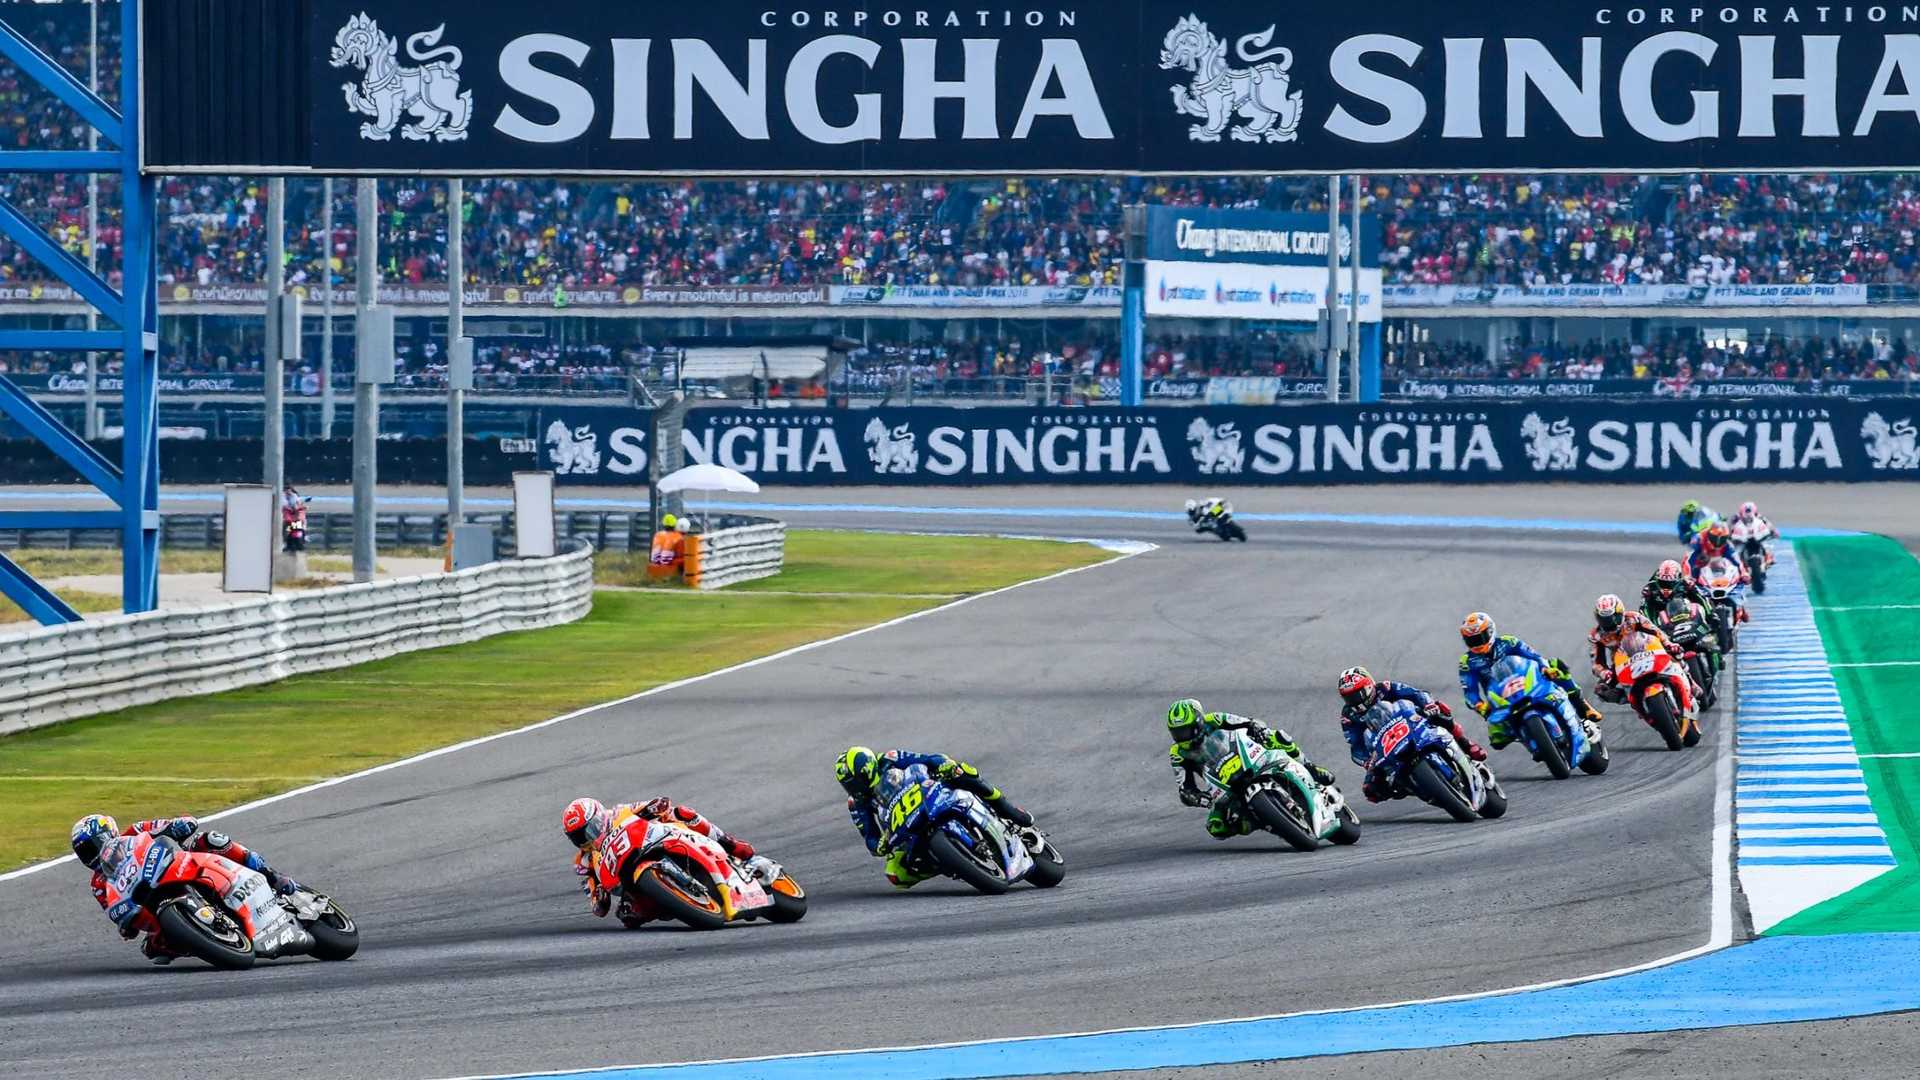 2021 Thai MotoGP cancelled as replacement efforts are underway